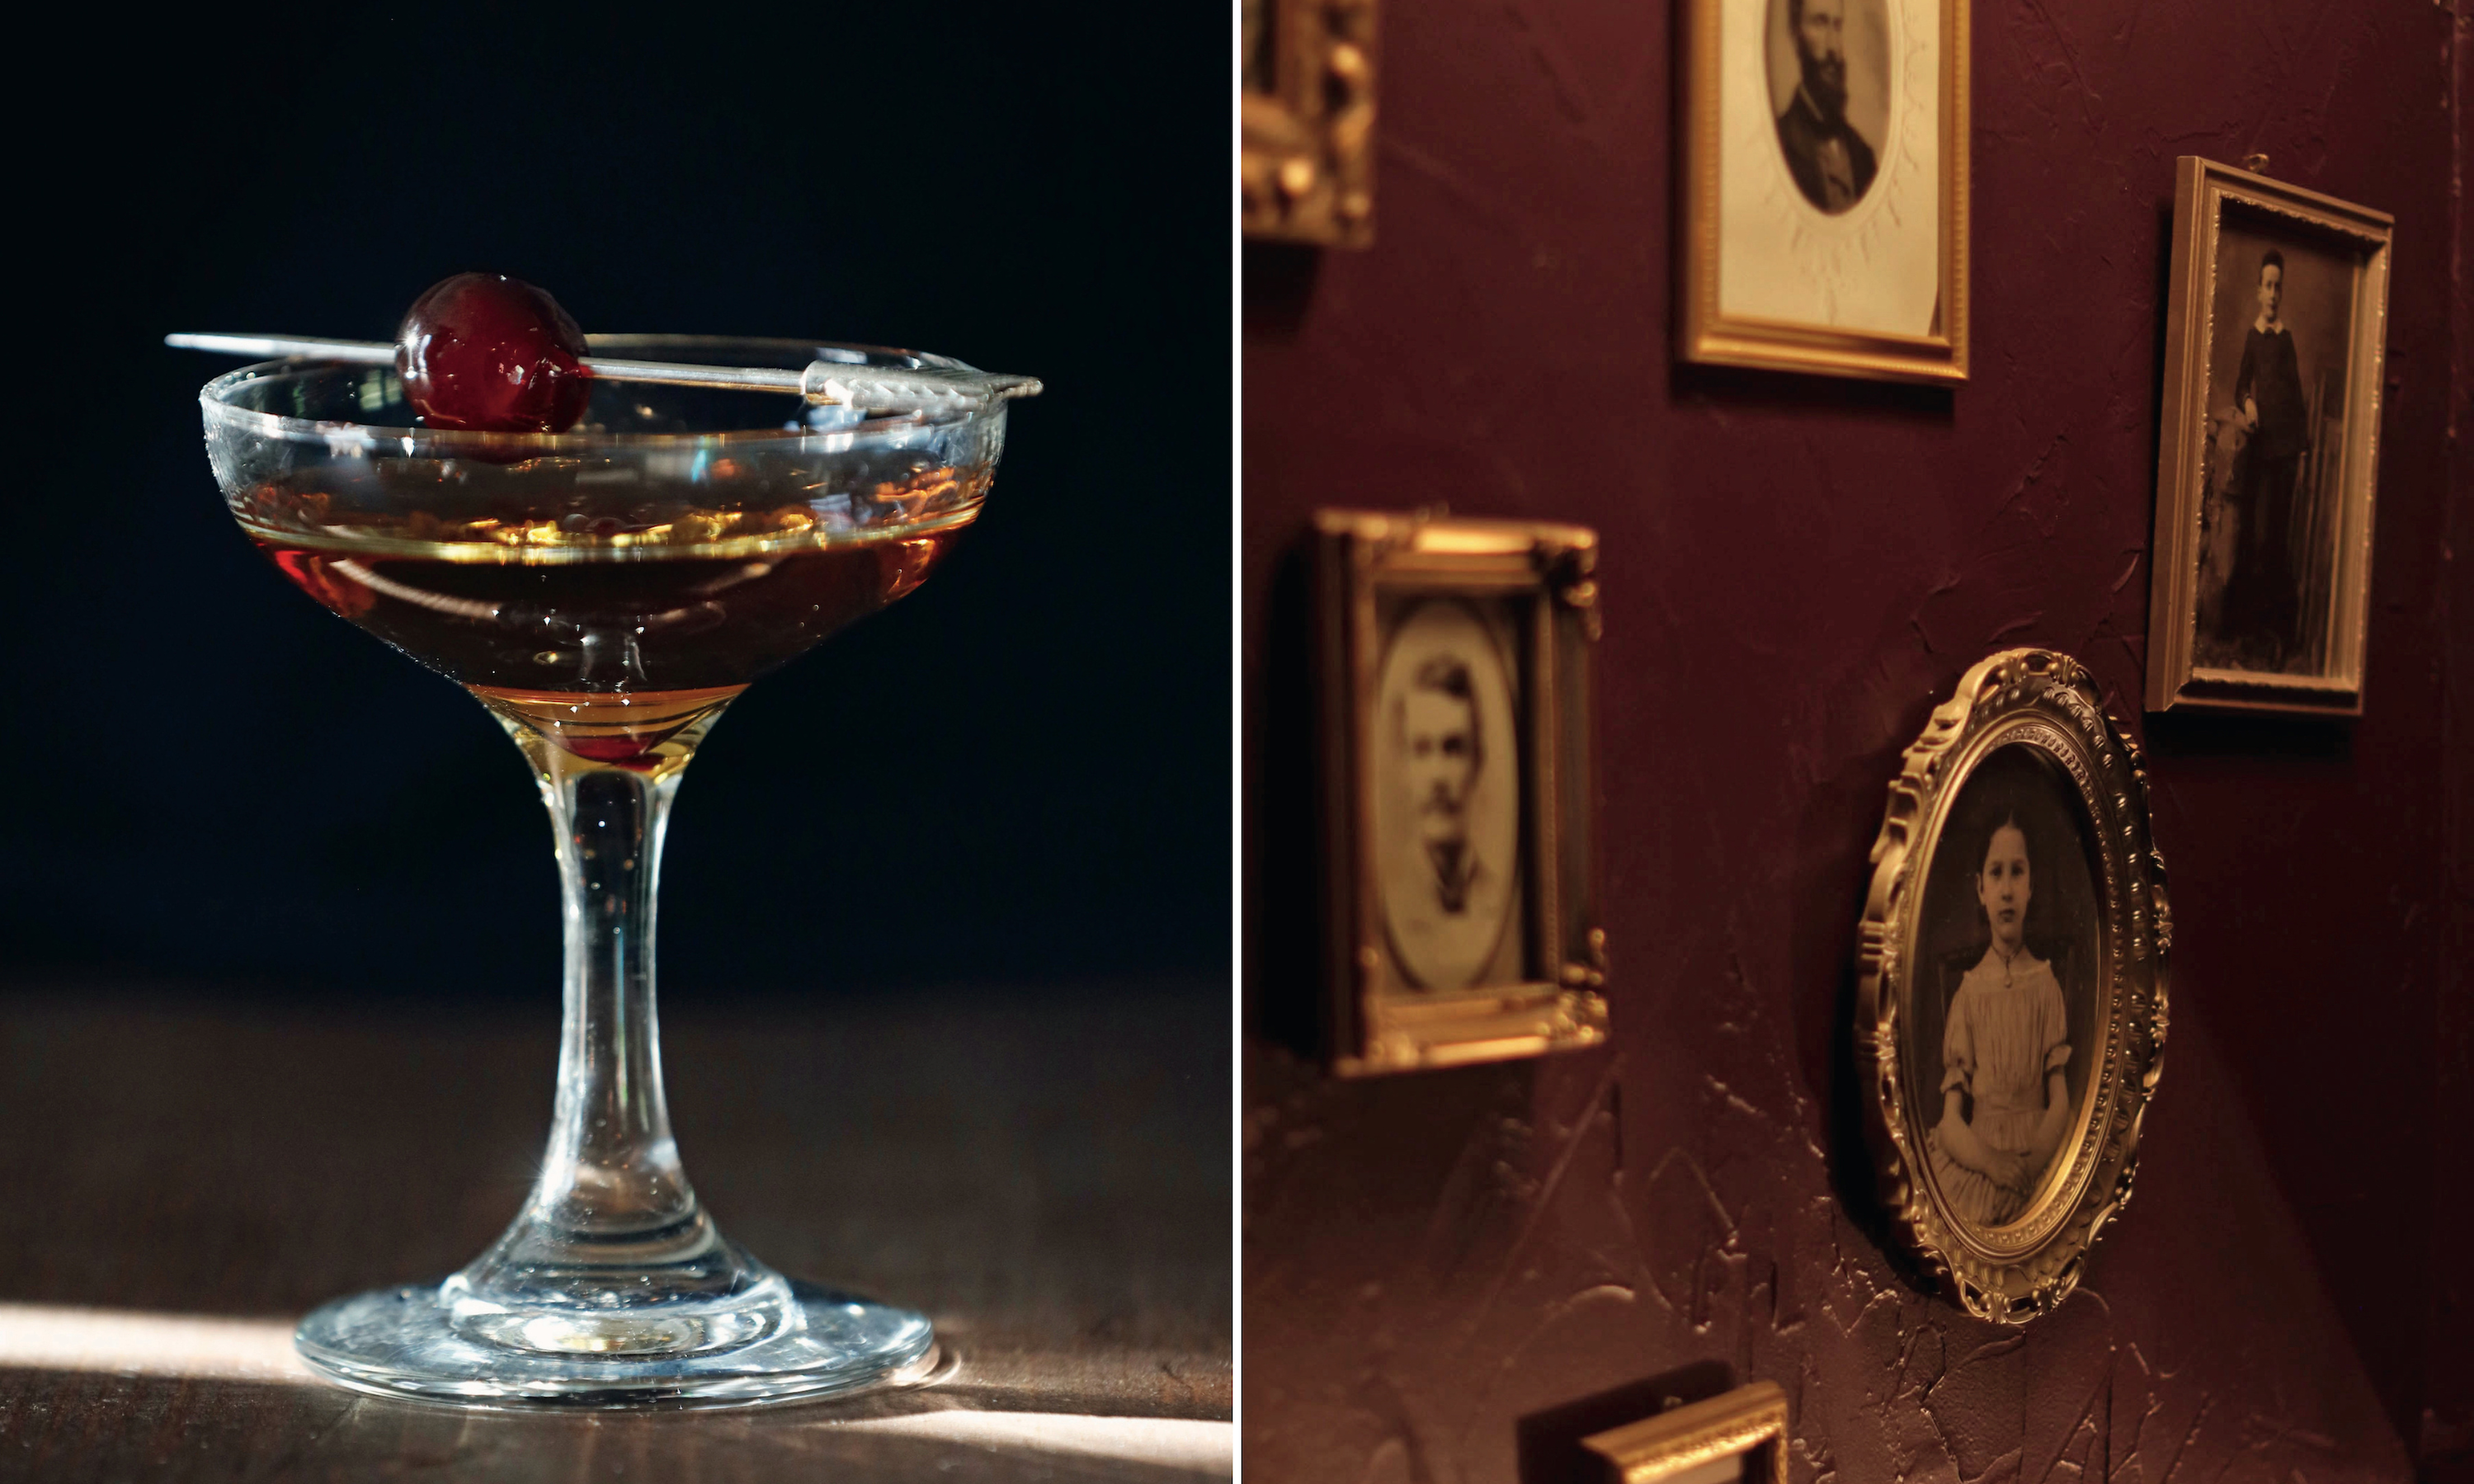 A collage of two images: a Manhattan in a glass;